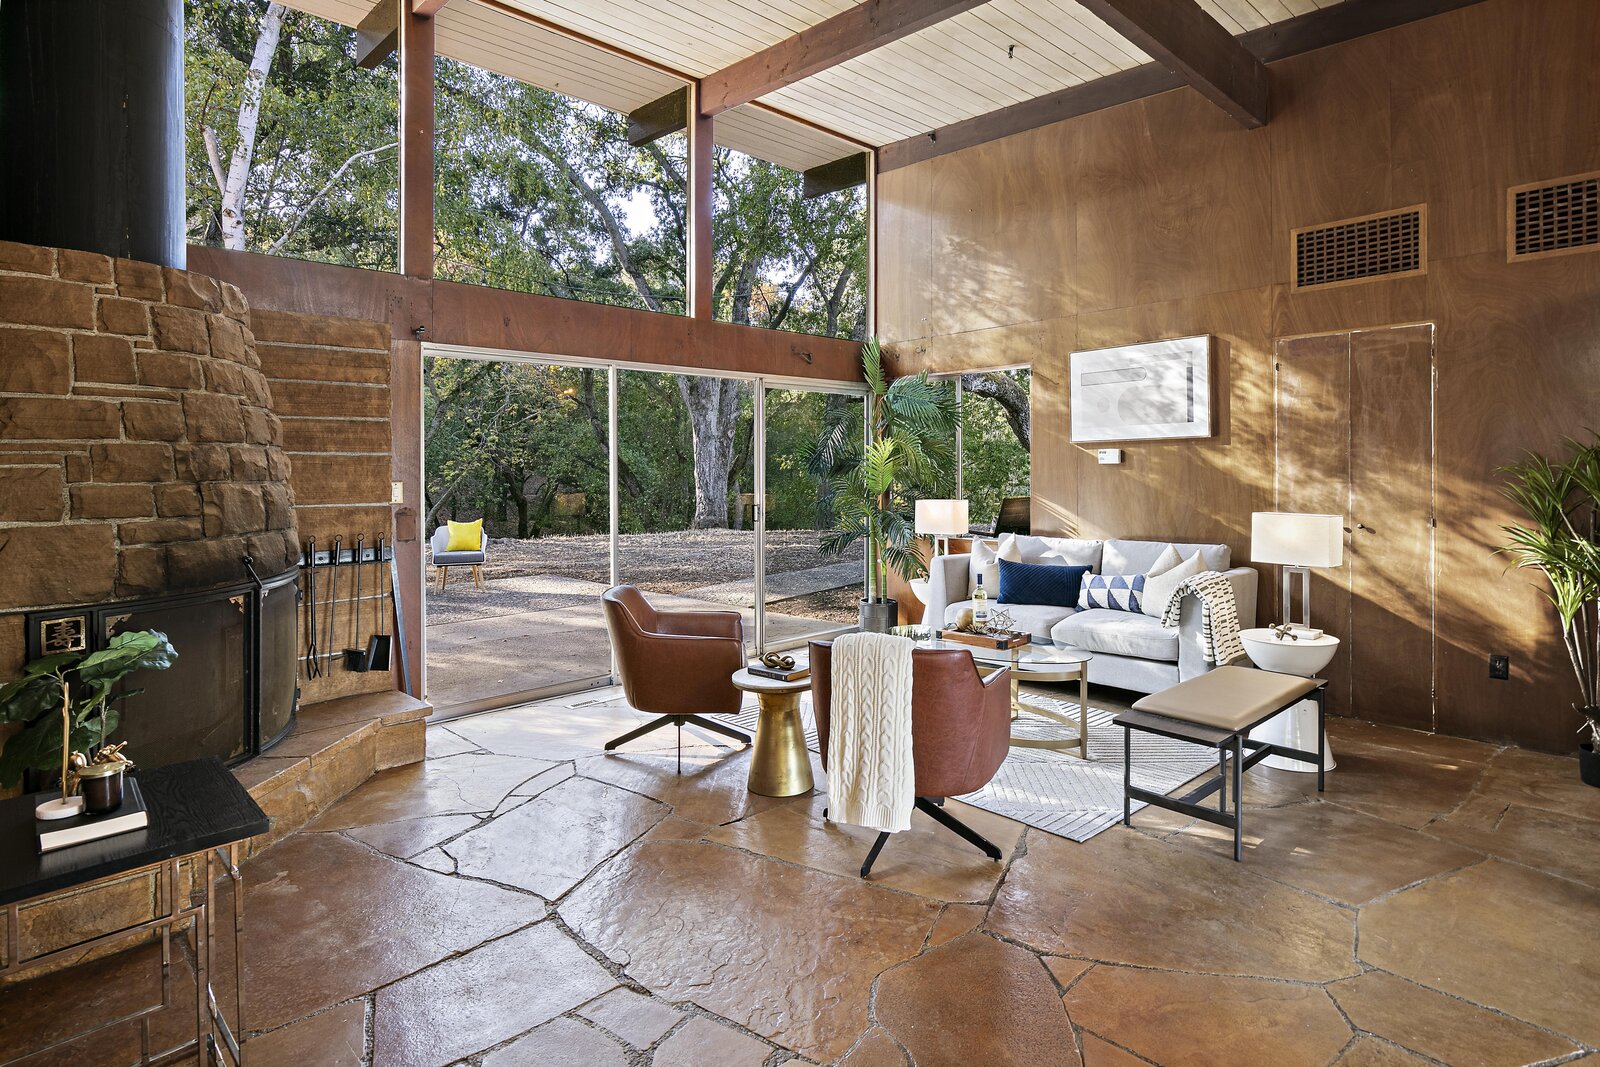 Pristine Midcentury Residence in Danville With Multiple Dwelling Units